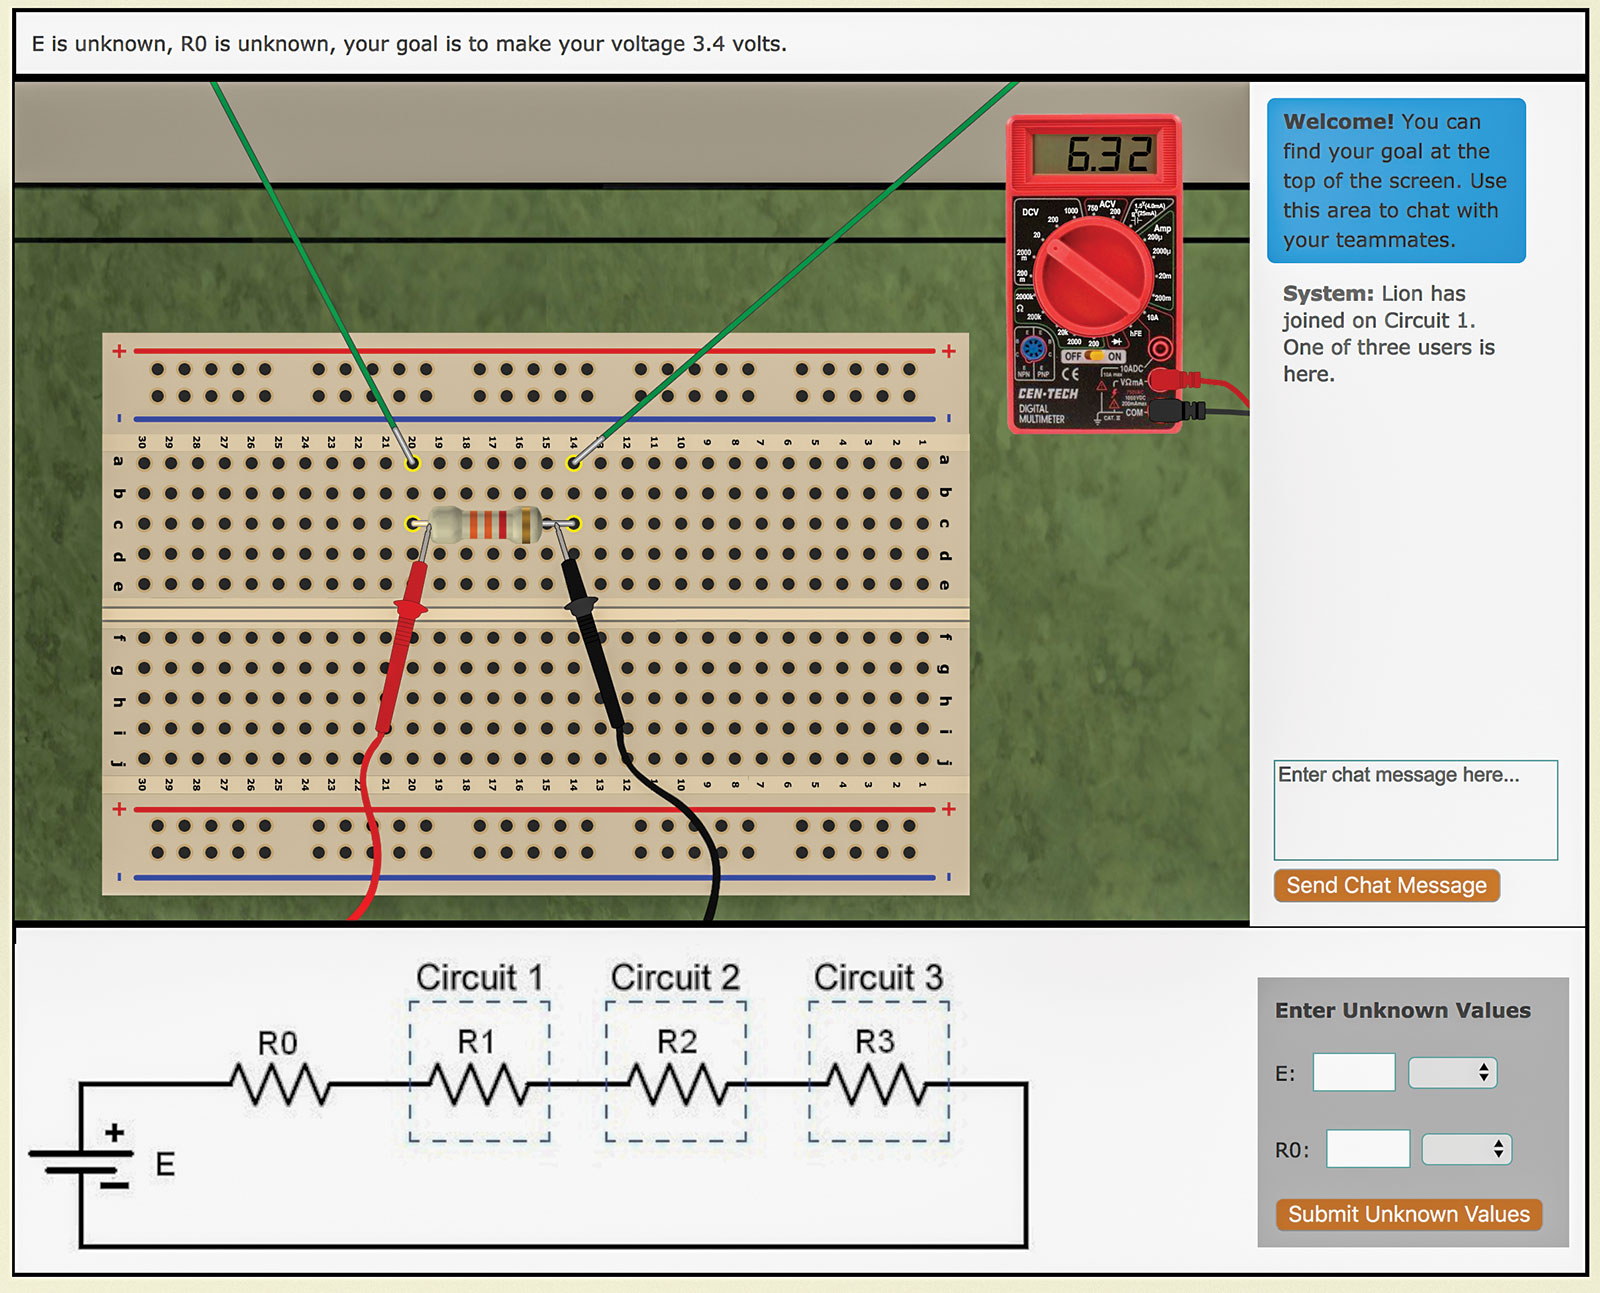 The three-resistor challenge (Level D), as seen by team member Lion on Circuit 1.